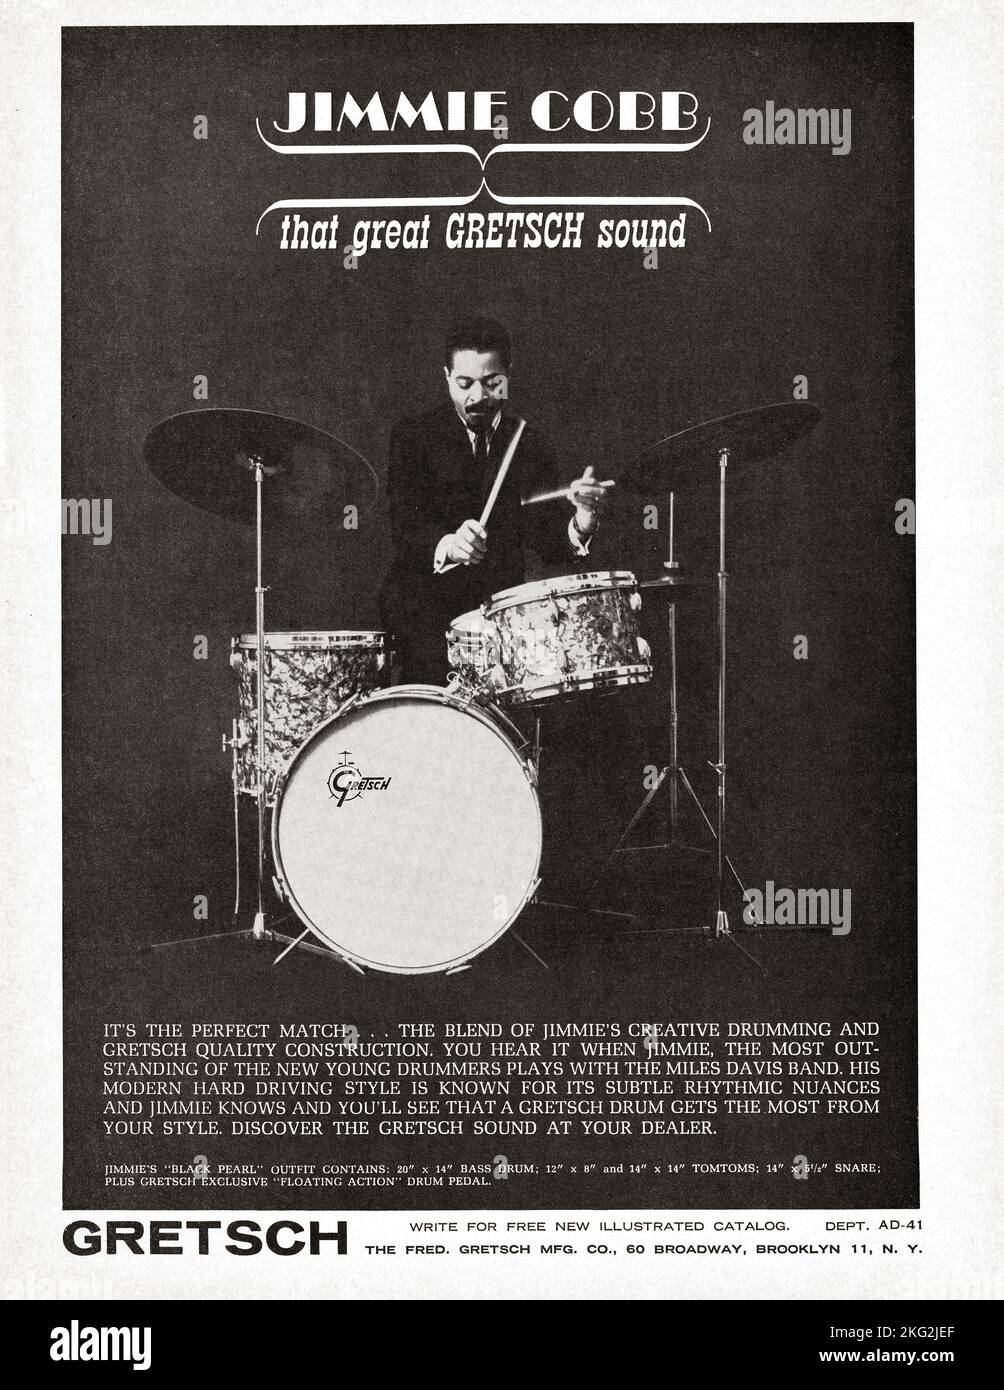 An ad for Gretsch drums in a 1960s music magazine featuring jazz drummer Jimmie Cobb. Stock Photo